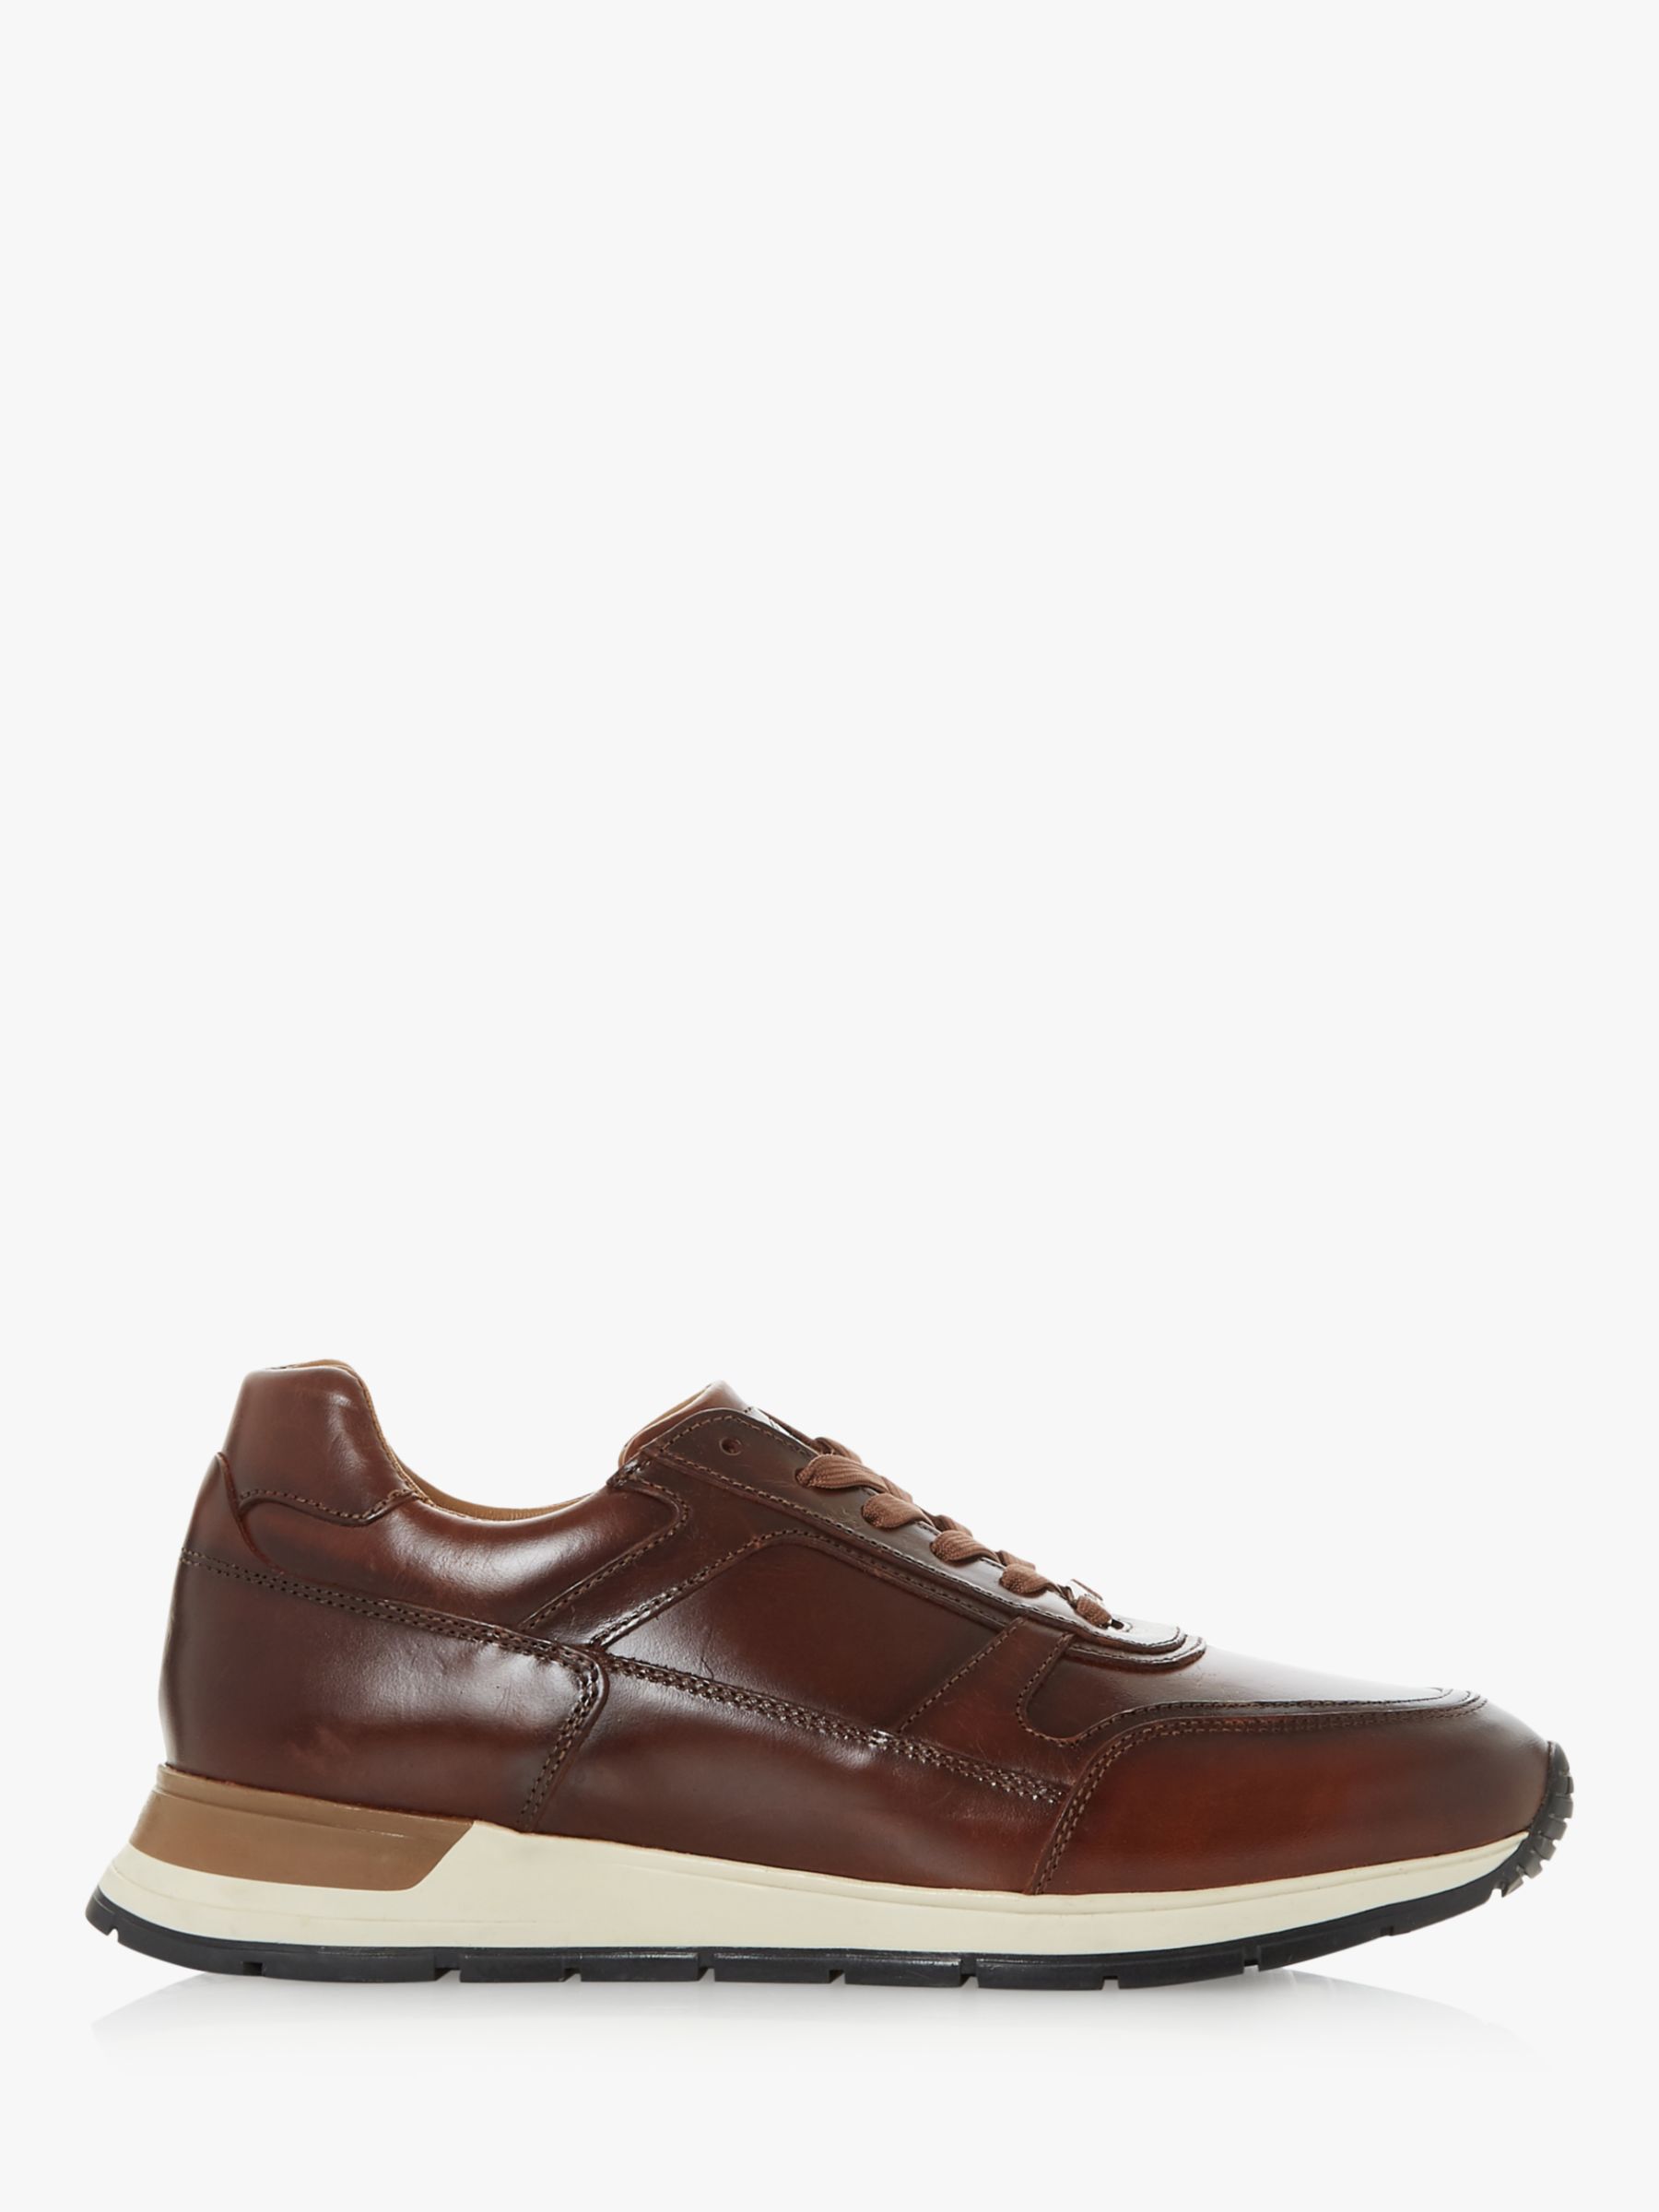 Dune Transformm Lace Up Leather Trainers, Brown